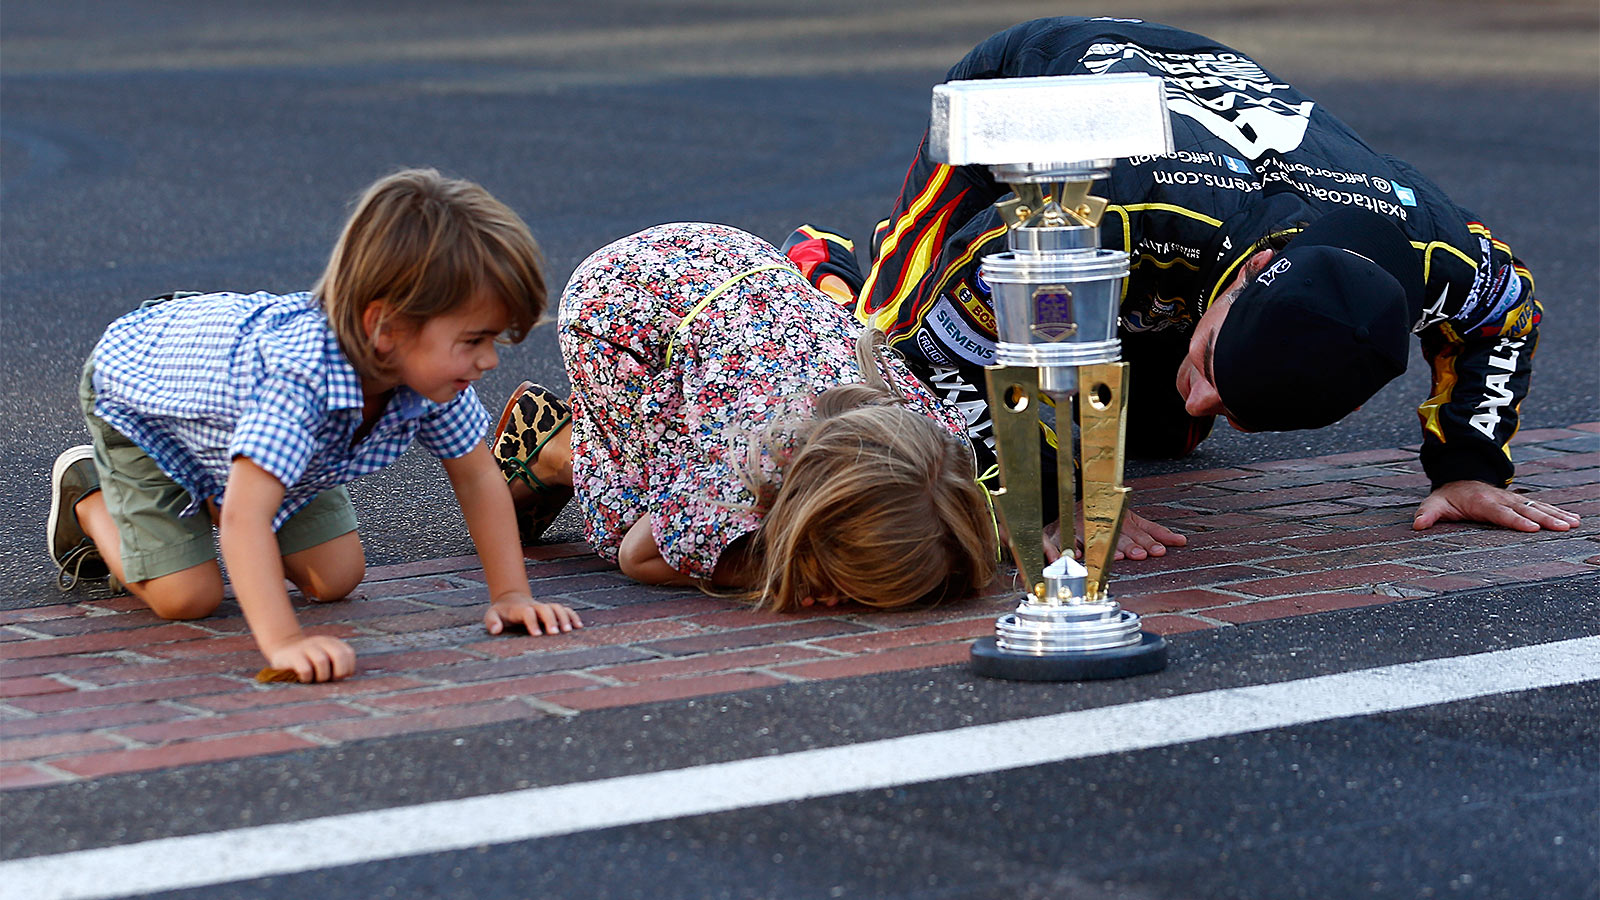 Sweet kiss of success: Fifth Indy win could propel Gordon to fifth title